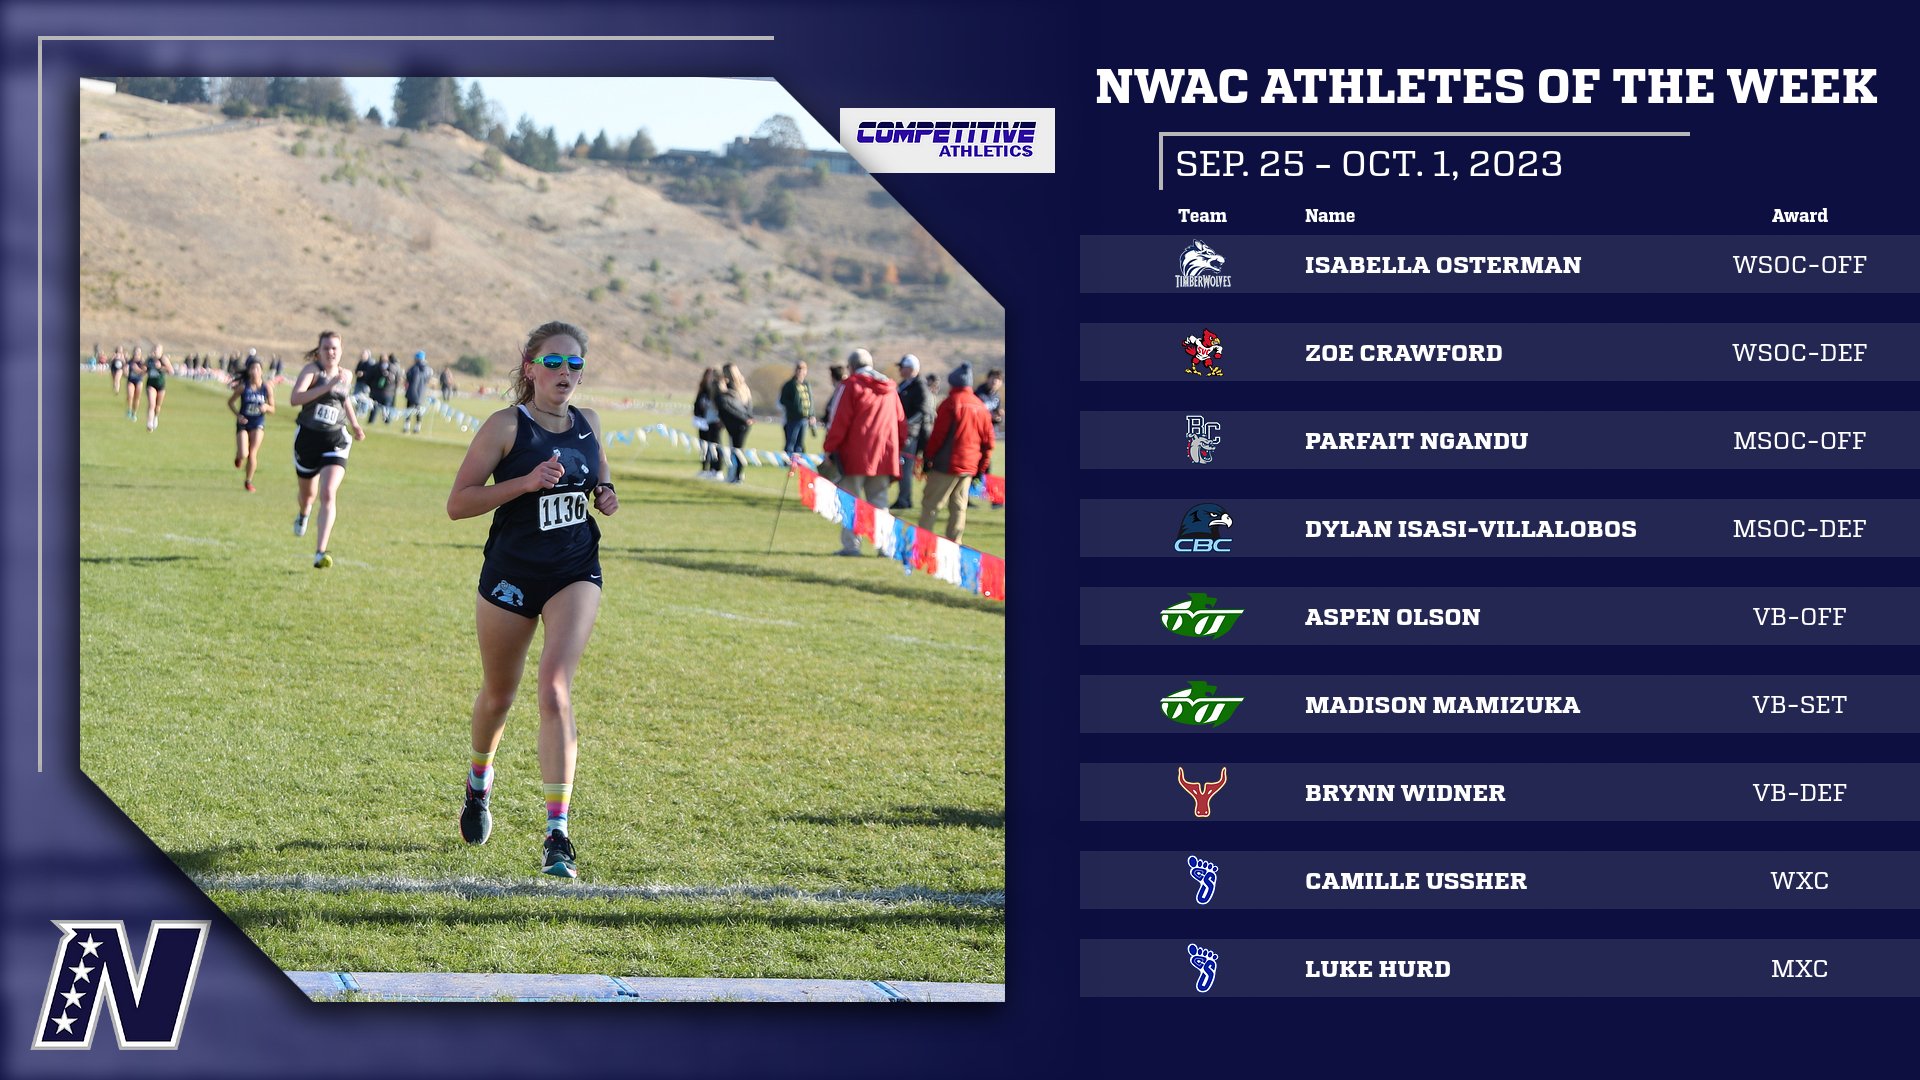 Competitive Athletics NWAC Athletes of the Week: Sep. 25 - Oct. 1, 2023